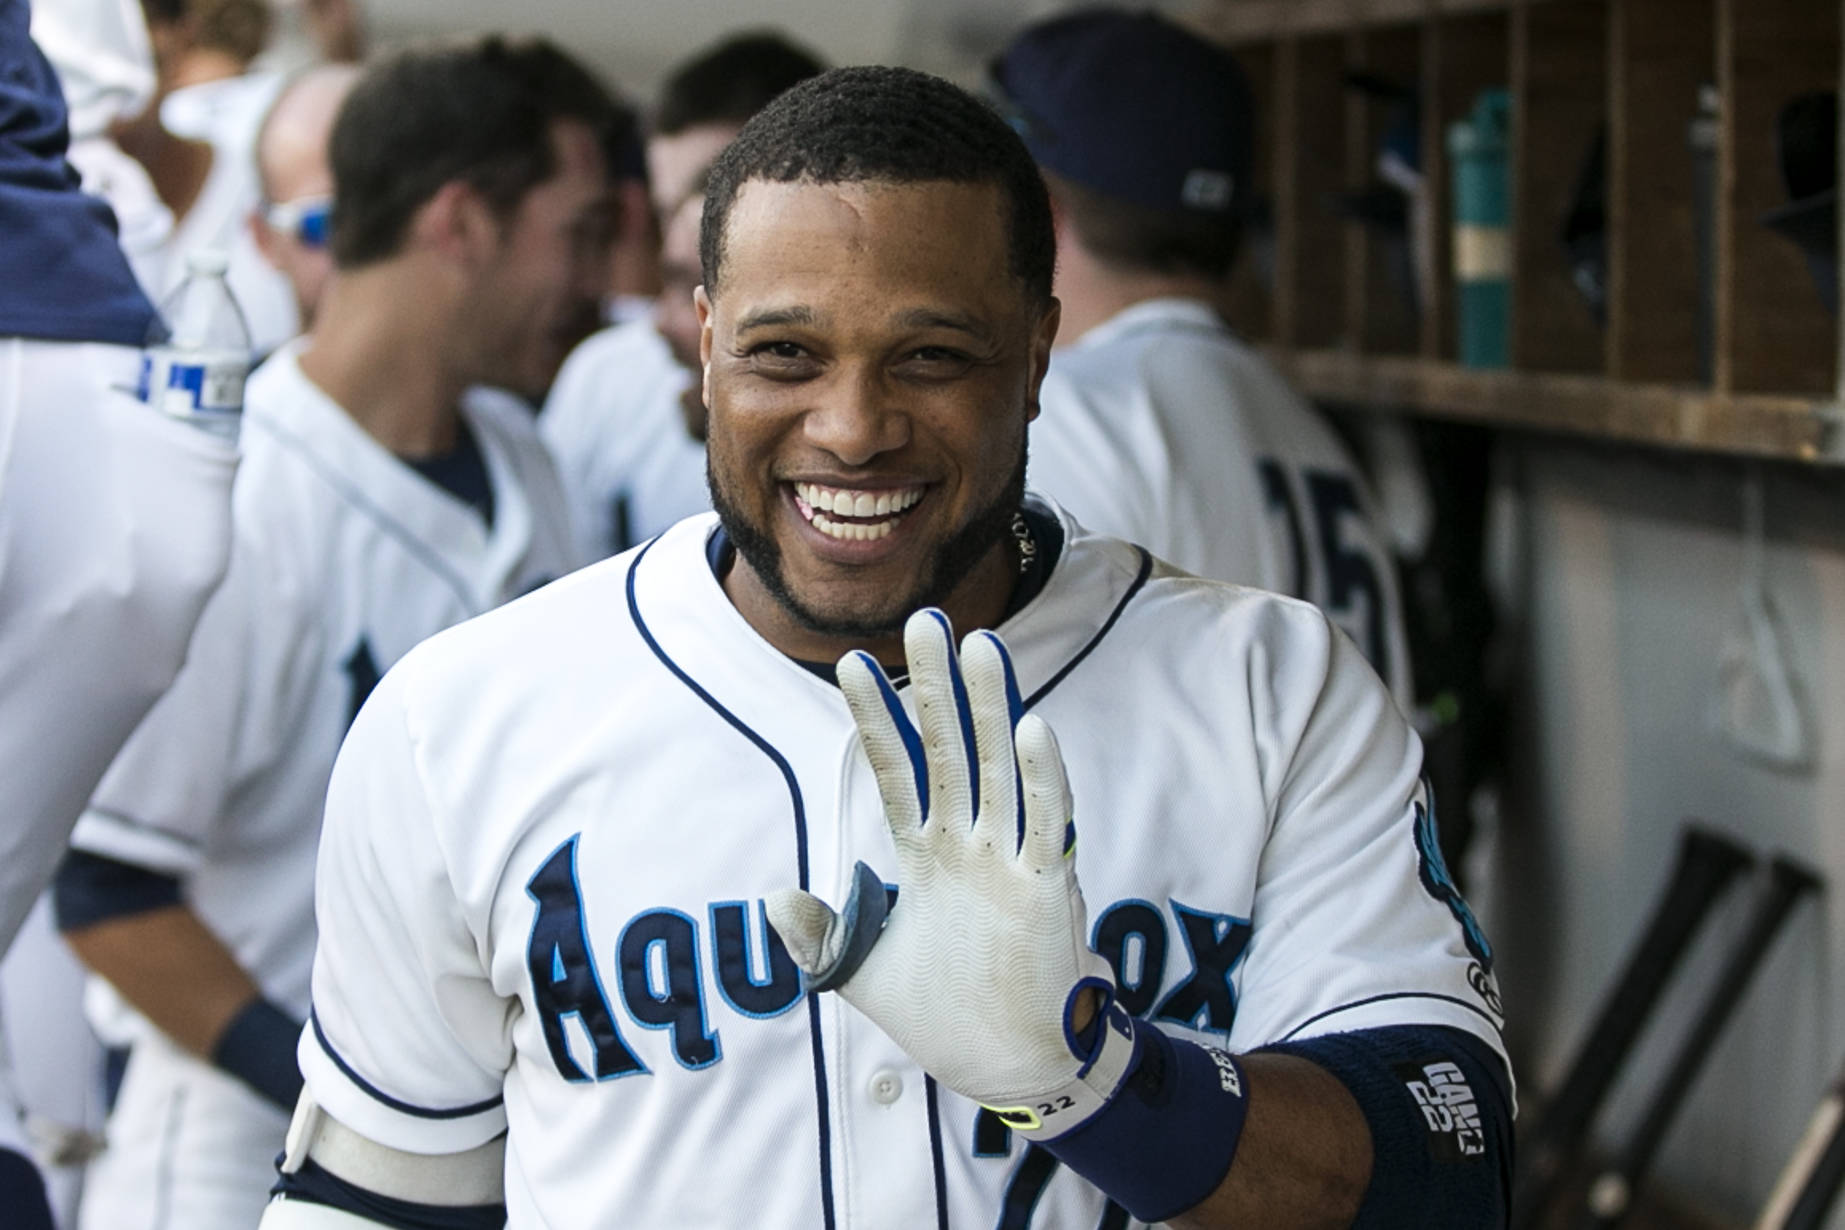 Robinson Cano celebrates his home run on Aug. 9 while playing for the Everett AquaSox on a rehab assignment. (Kevin Clark / The Herald)